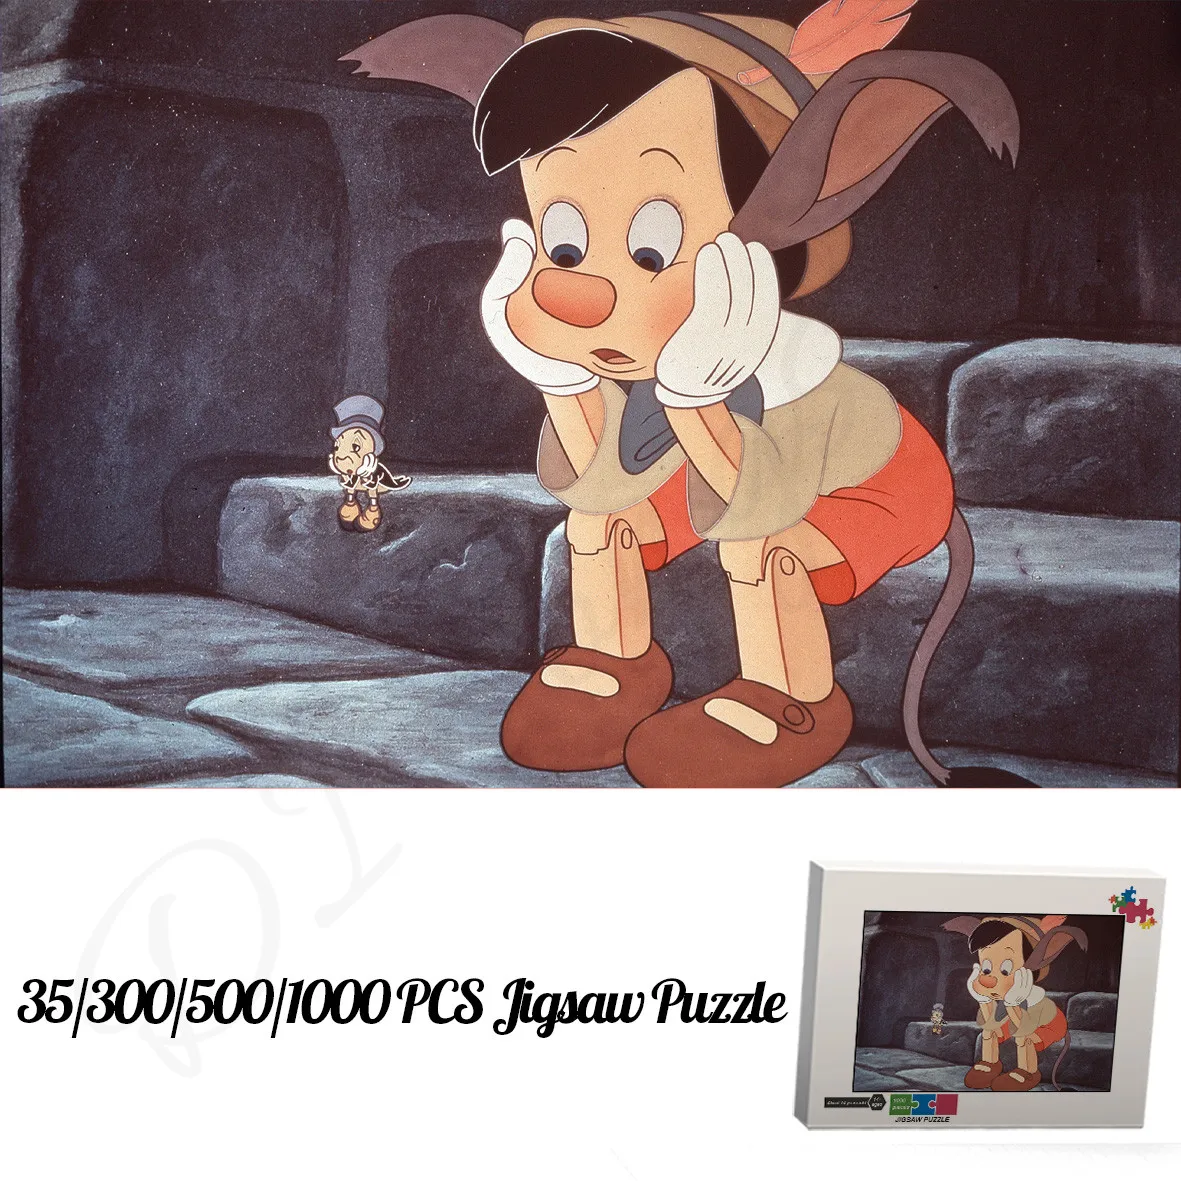 Disney Animated Film Pinocchio Puzzles Classic Cartoon Movie 35 300 500 1000 Pieces of Wooden Jigsaw Puzzles for Kids Unique Toy pinocchio